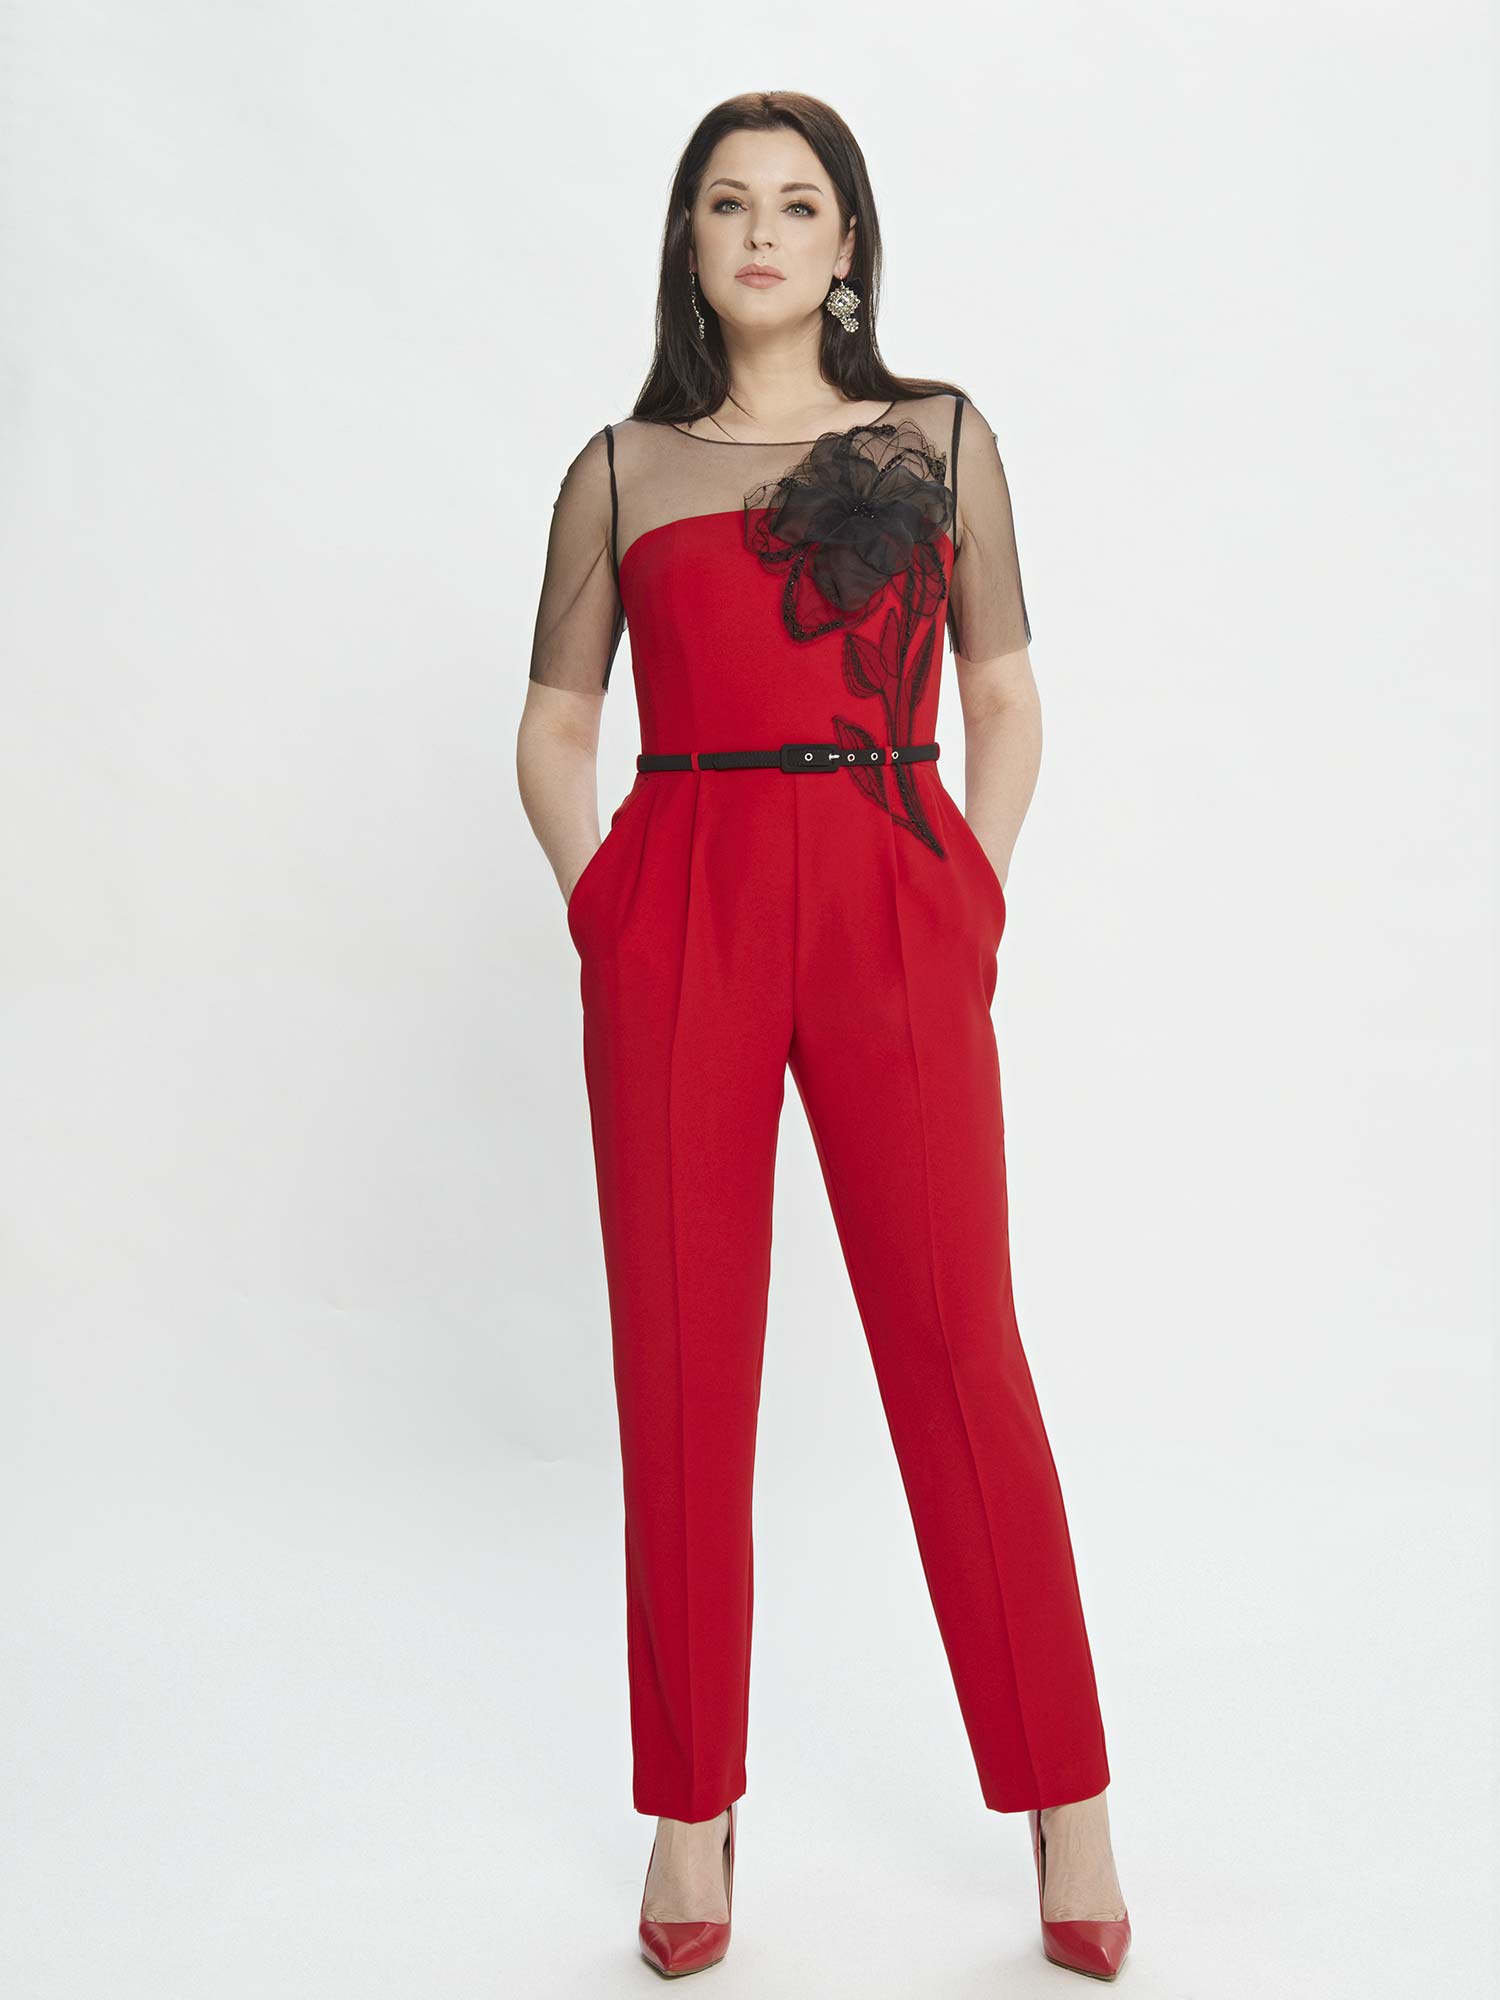 Style #M534-8, jumpsuit with illusion sleeves and floral applique, available in blue, red, pink, ivory